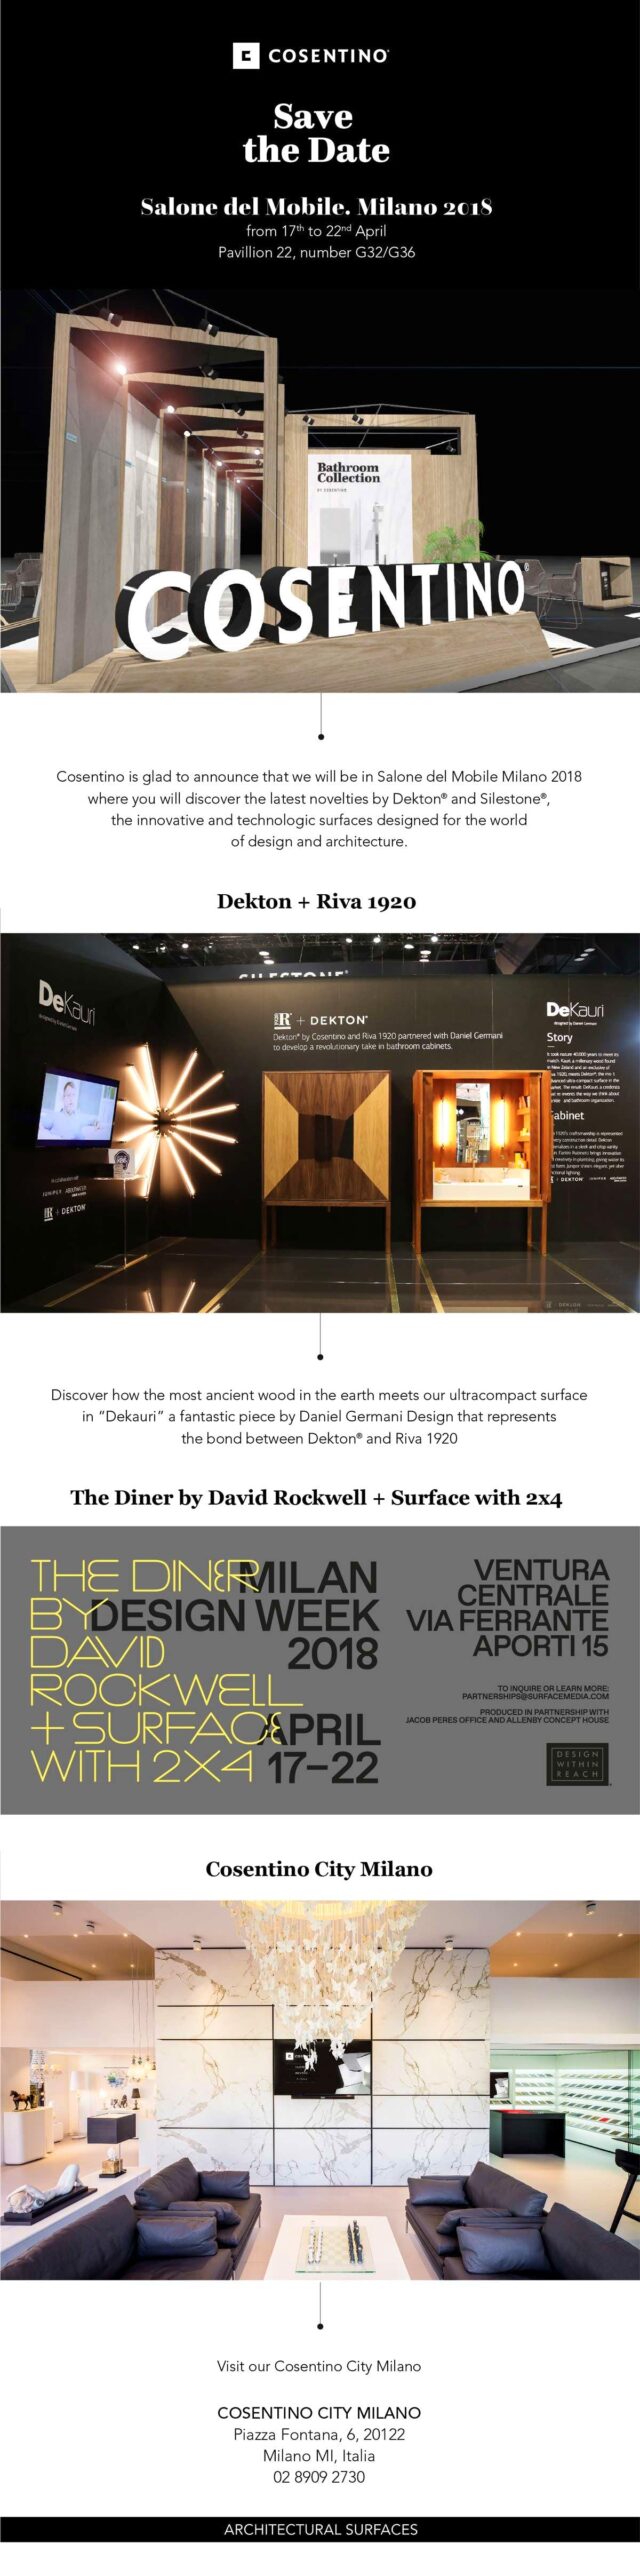 Image of Cosentino Save the Date Milan Design Week 18 2 1 6 scaled in Dekton® XGloss, among The 100 Best Business Ideas of 2016 by the magazine Actualidad Económica - Cosentino